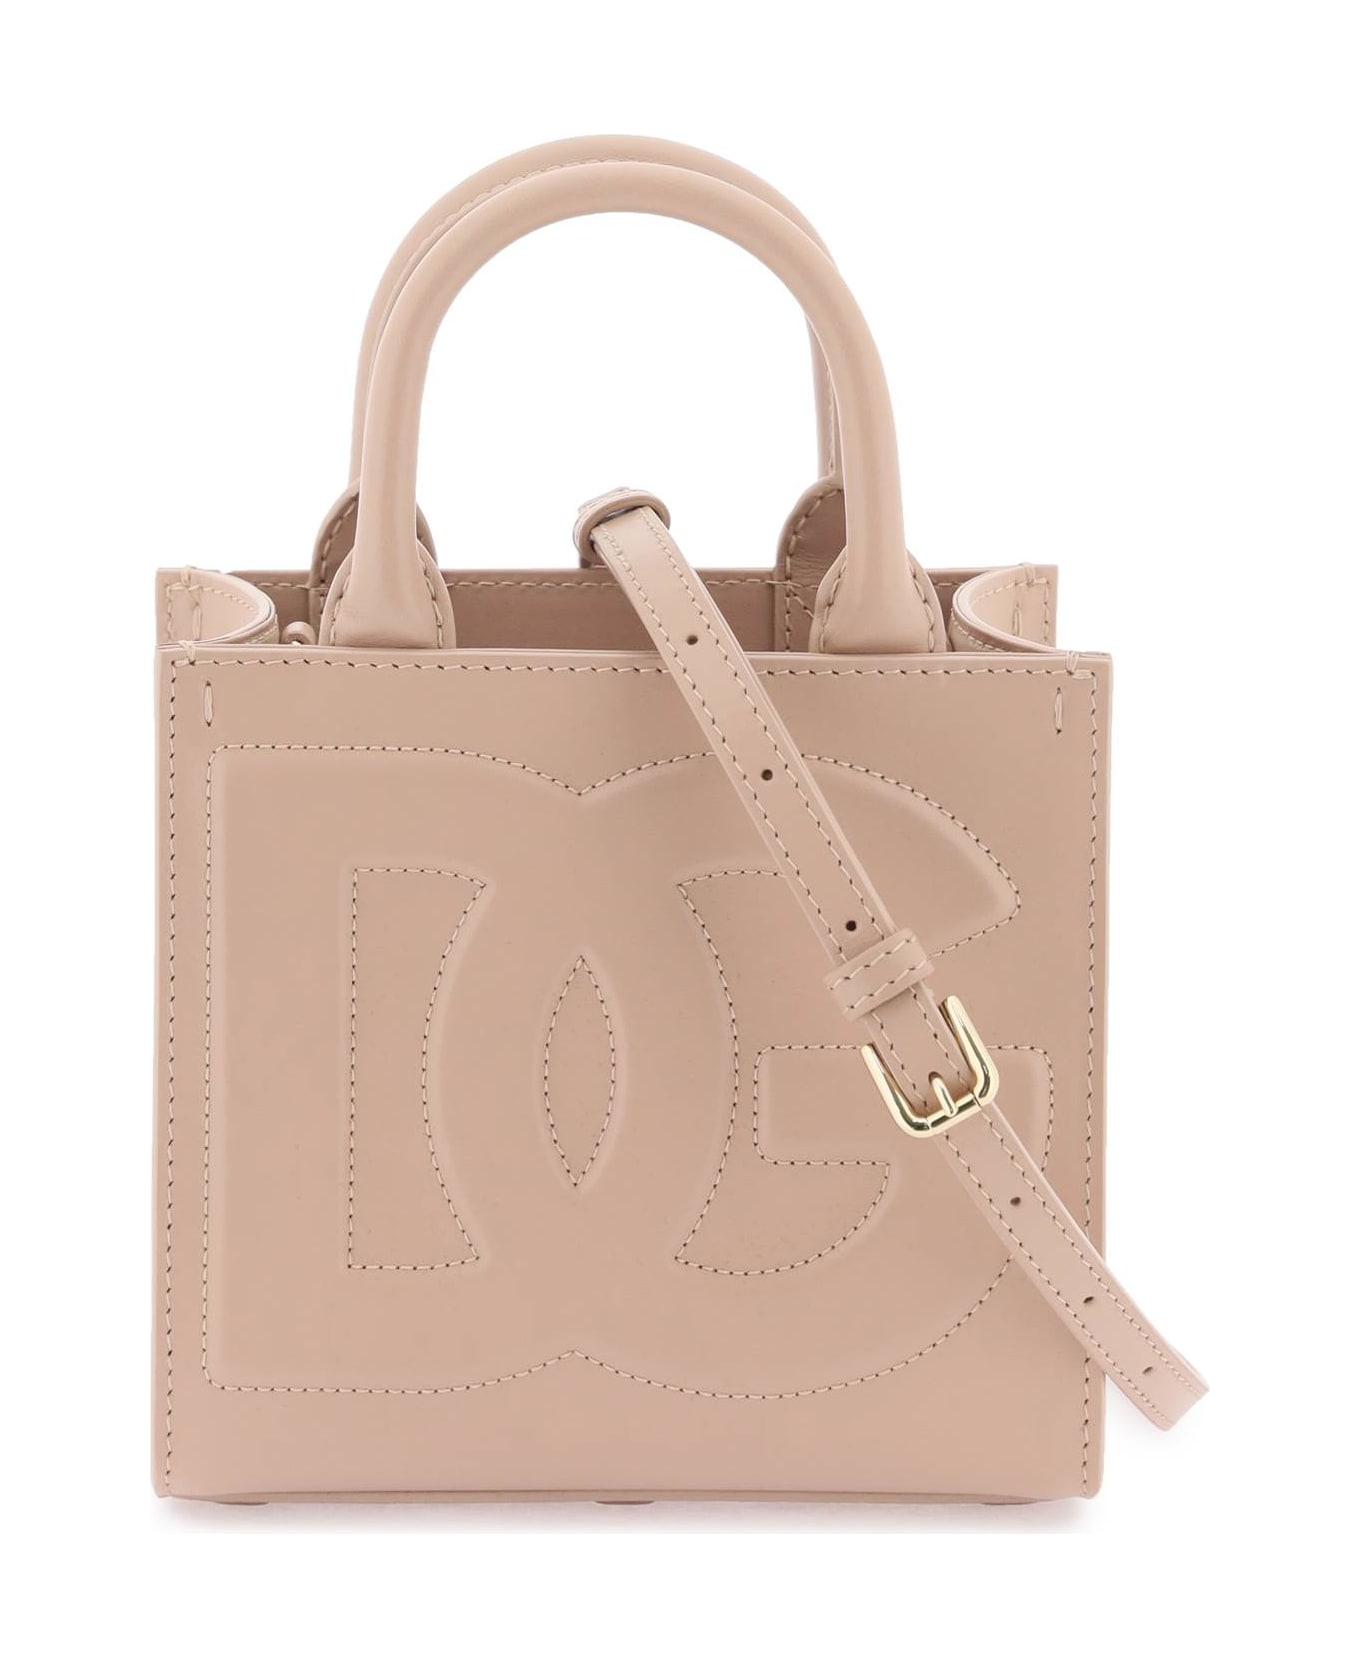 Dolce & Gabbana Dg Daily Tote Bag - Pale pink トートバッグ